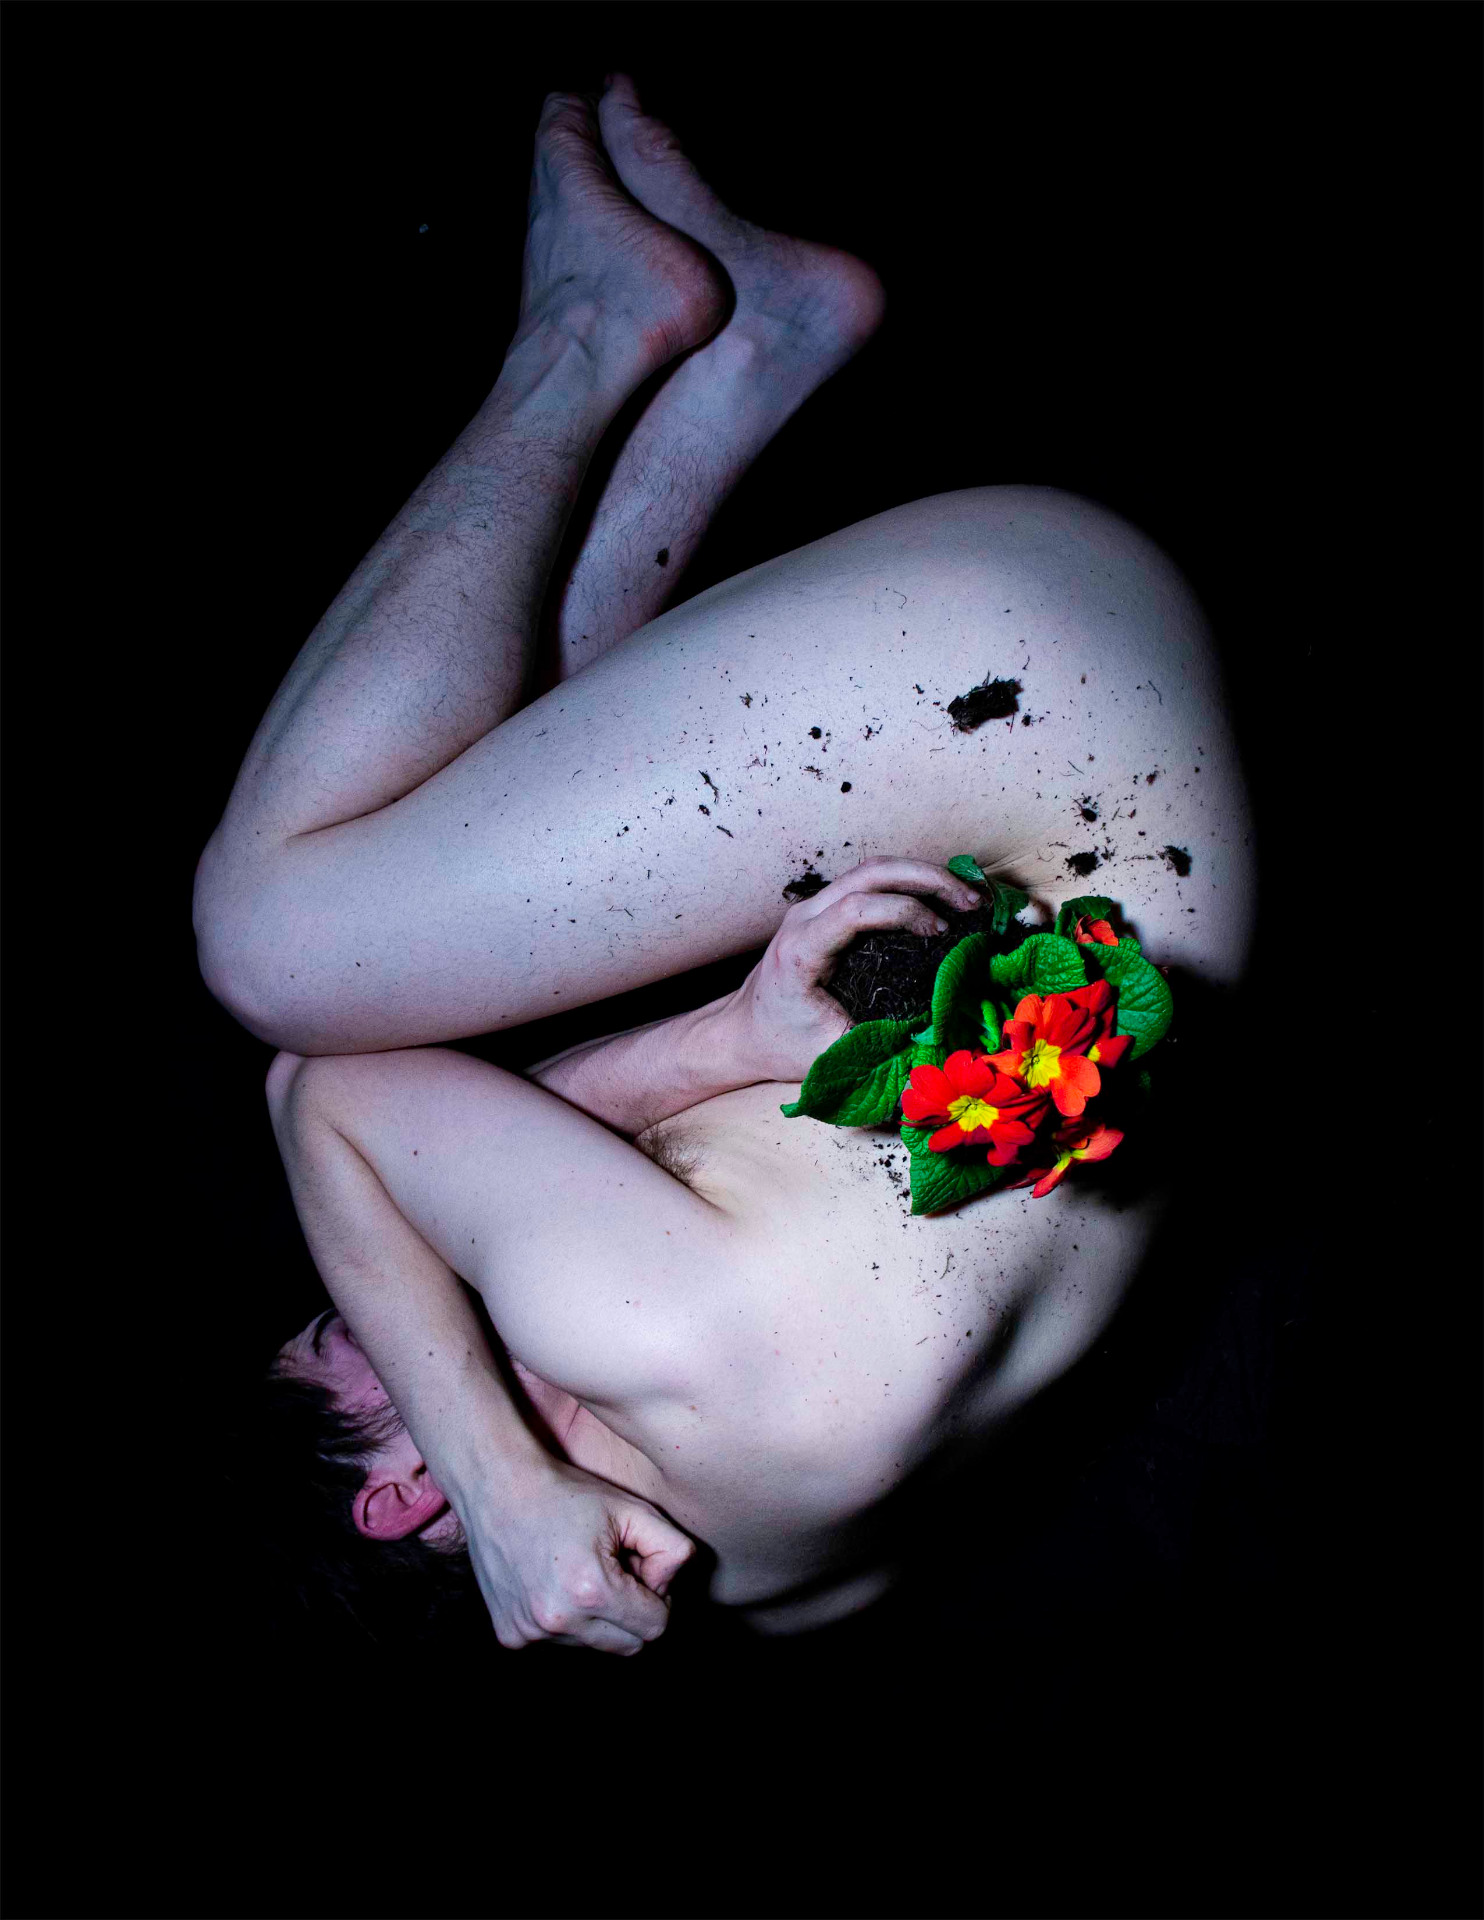 Photo of naked man curled up and holding flowering plant